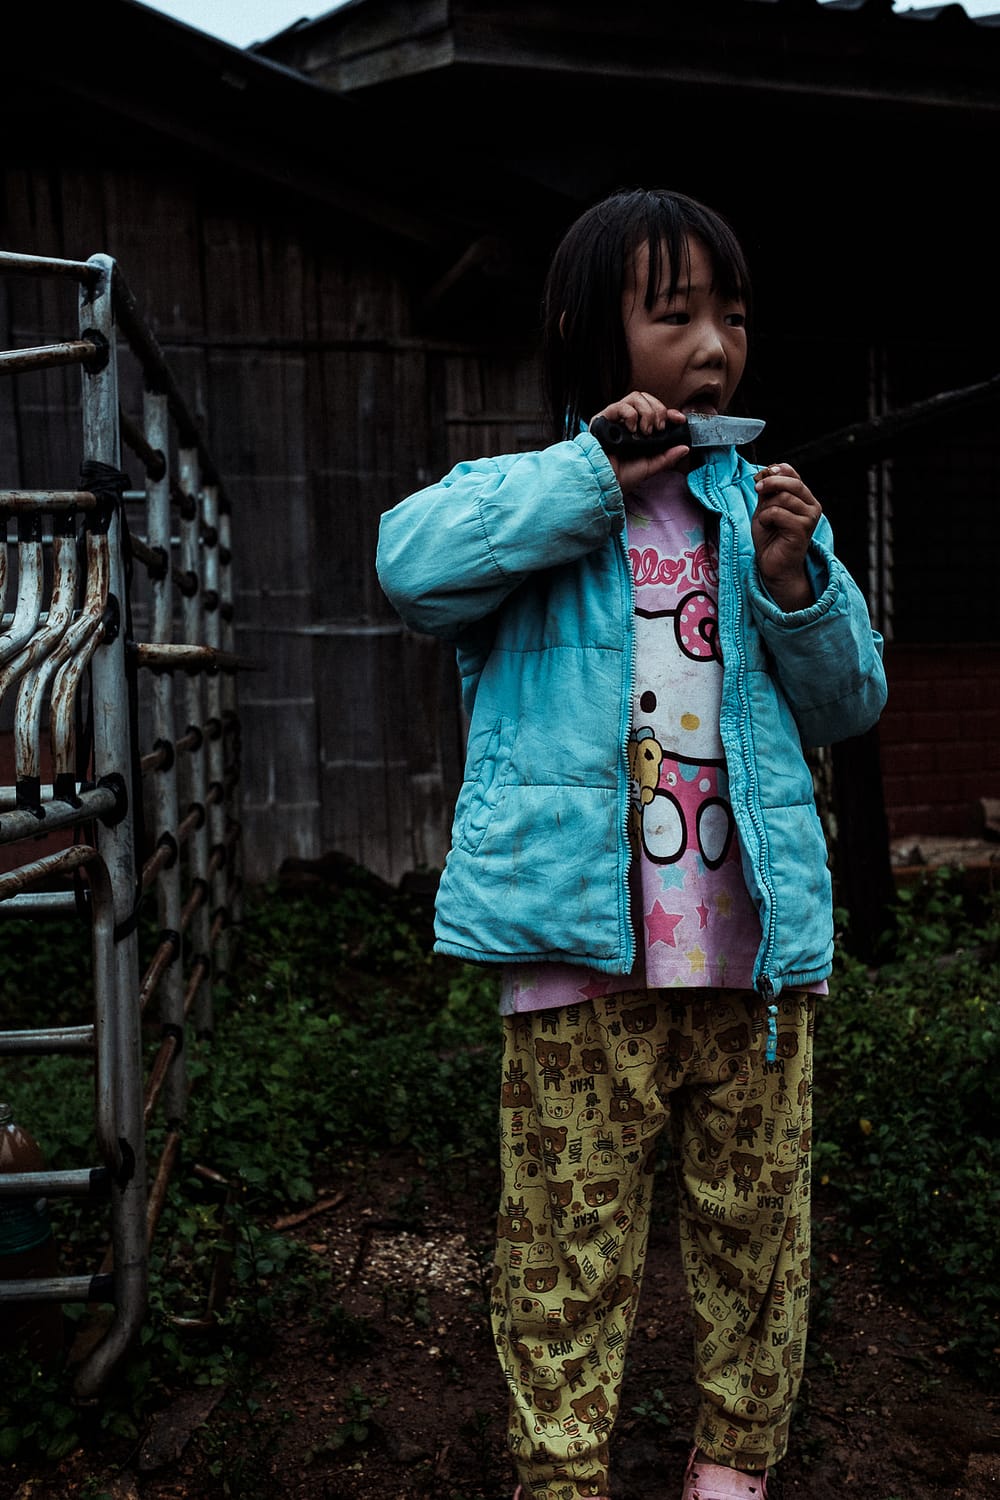 Kid playing with a knife in a village near Chiang Mai, thailand. November 2018